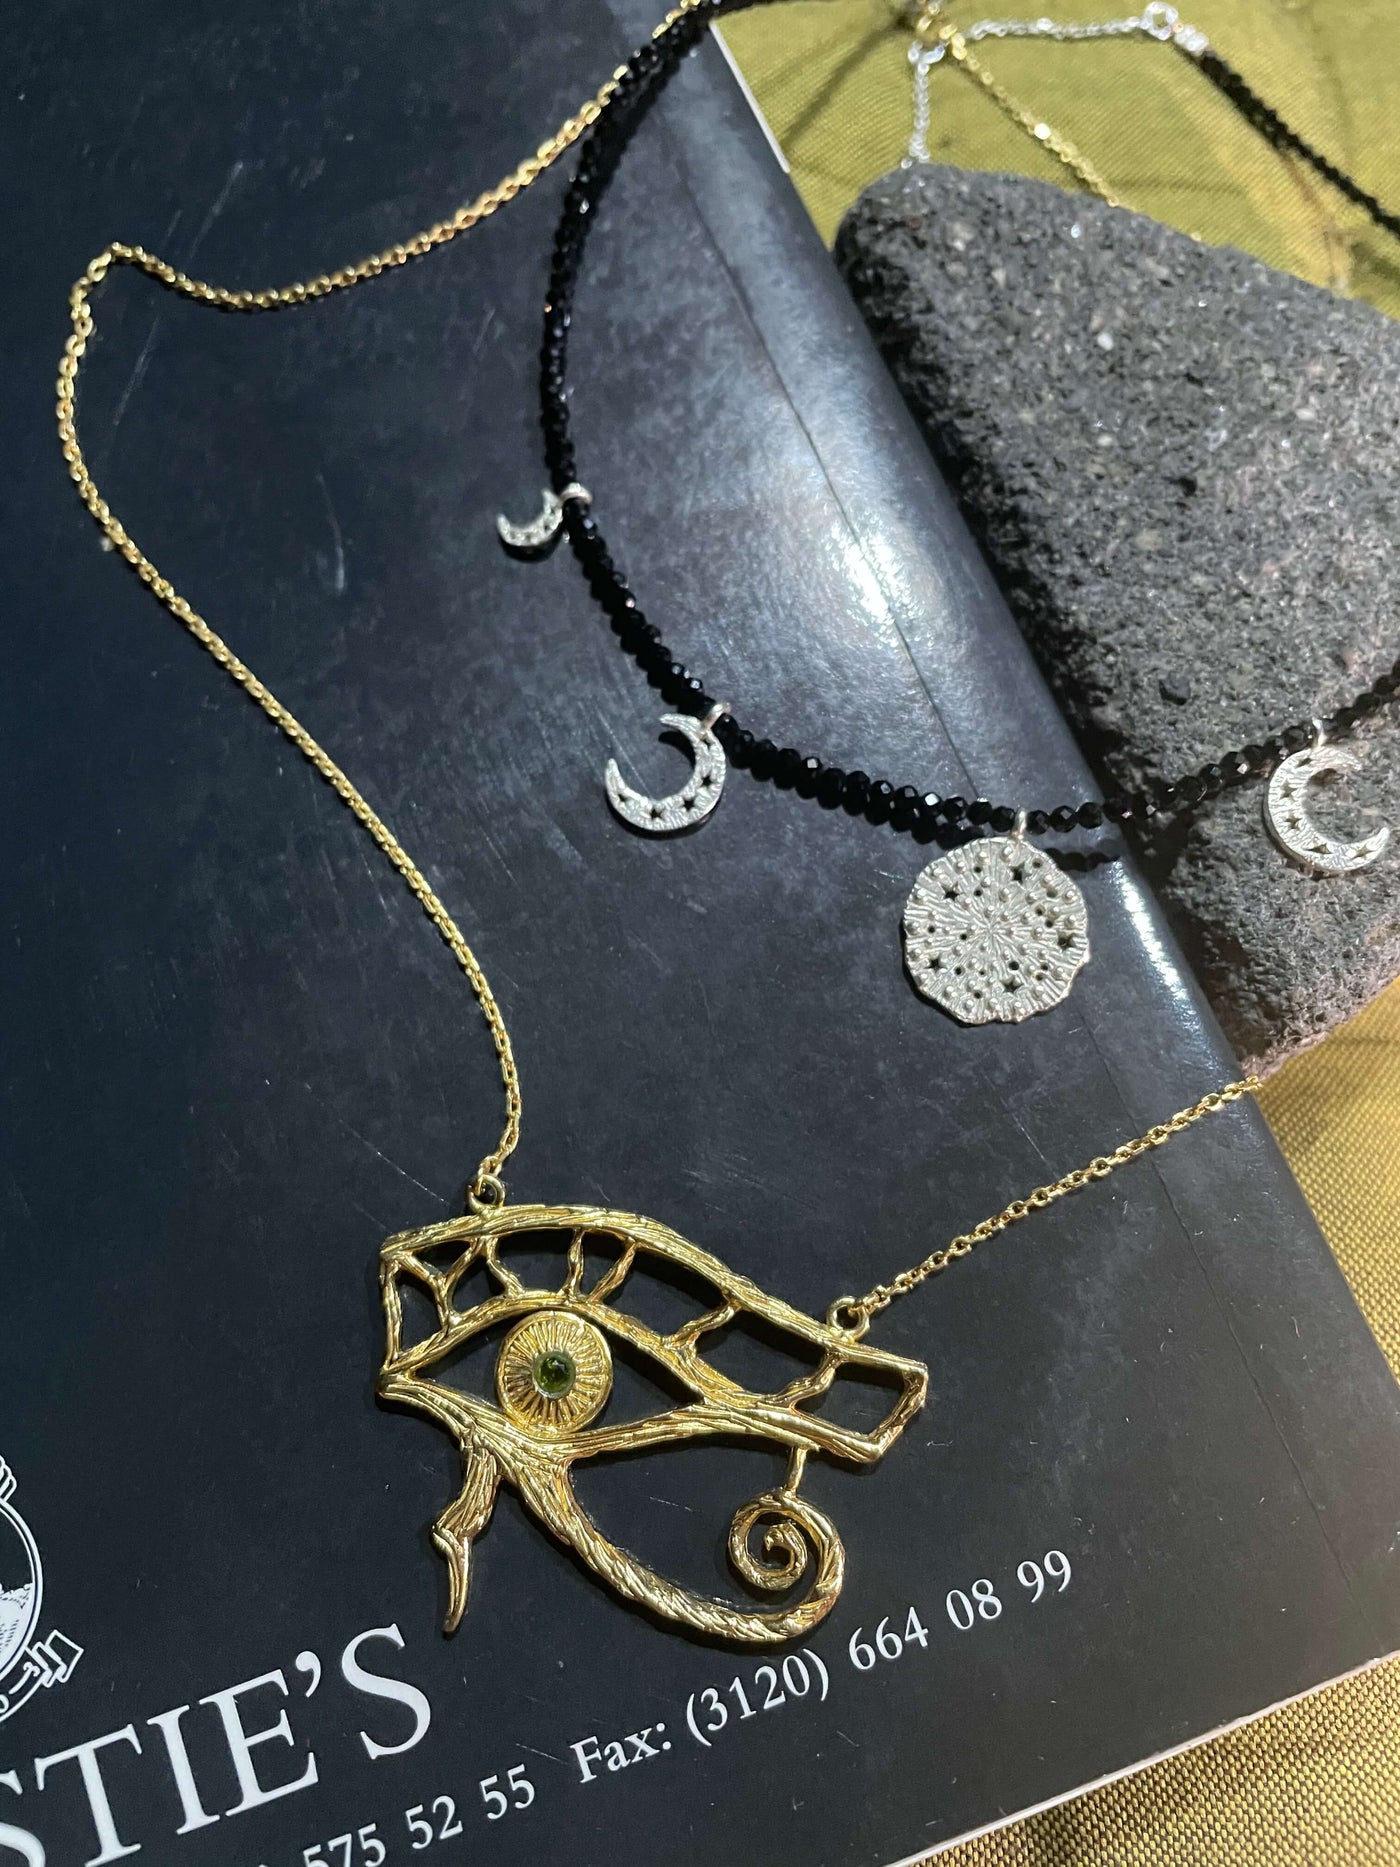 Eye of Horus necklace. Silver, gold-plated